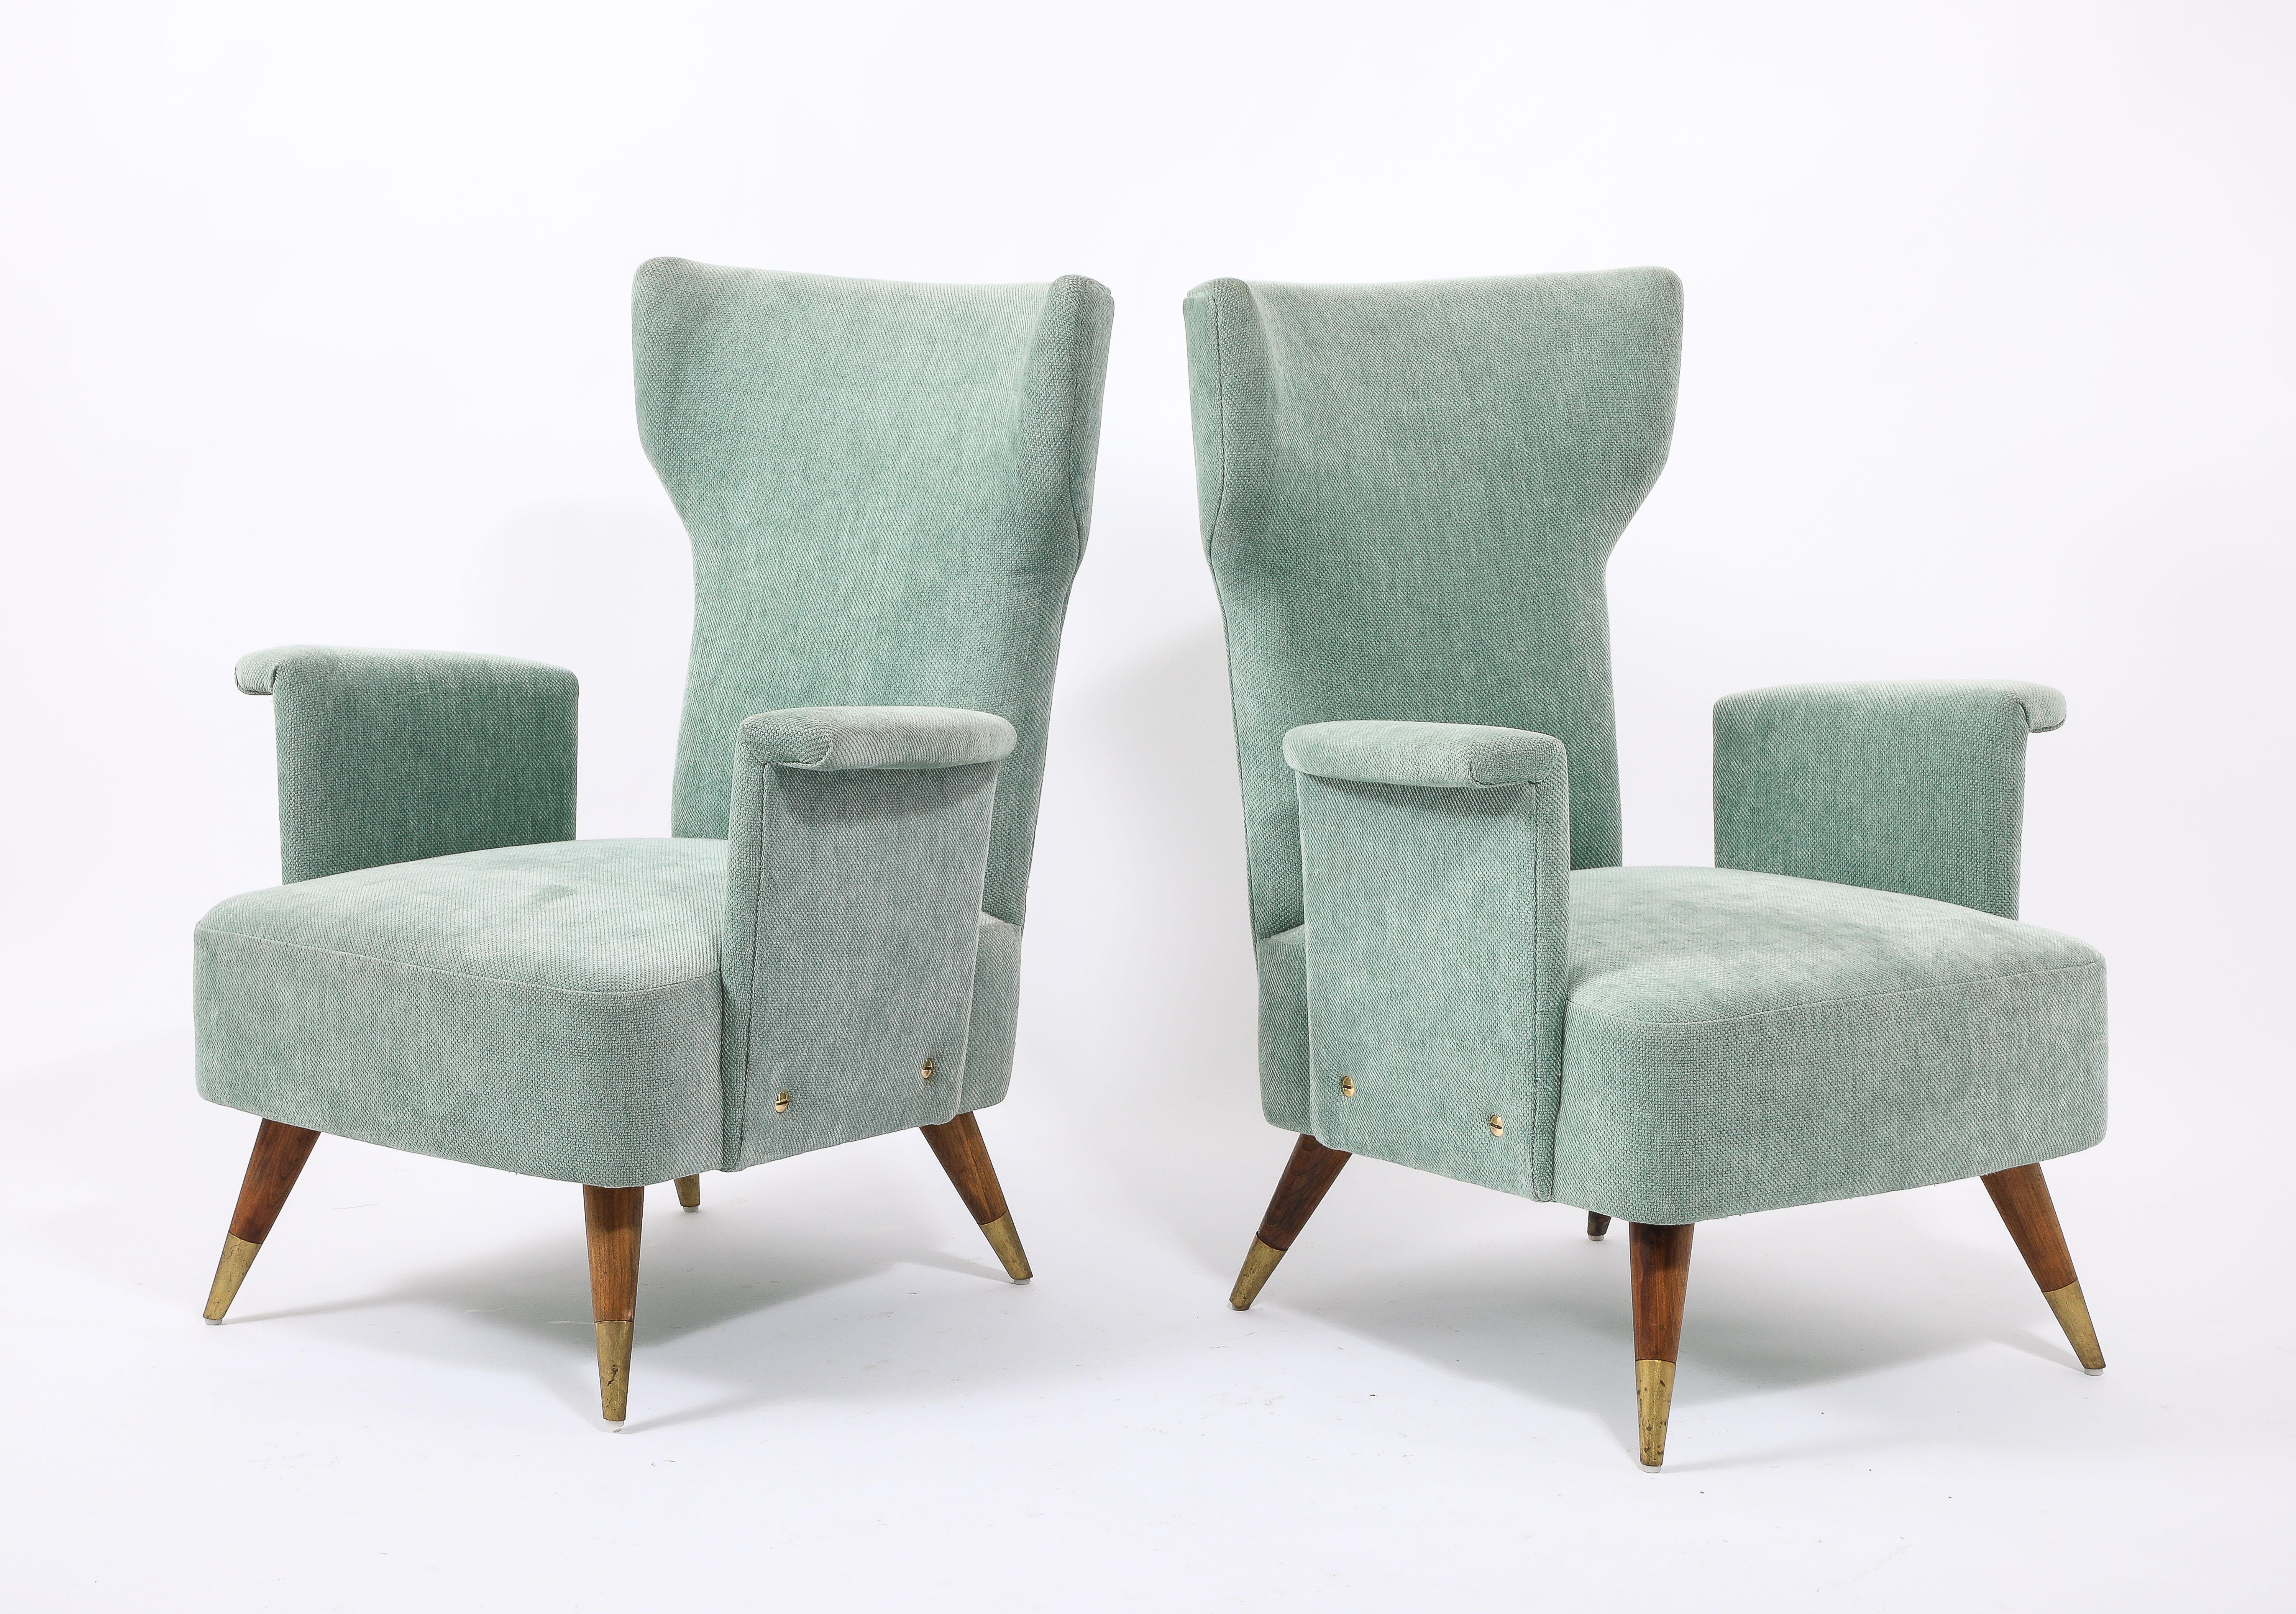 Brass Pale Blue Tall Italian Wingchairs, Italy 1950's For Sale